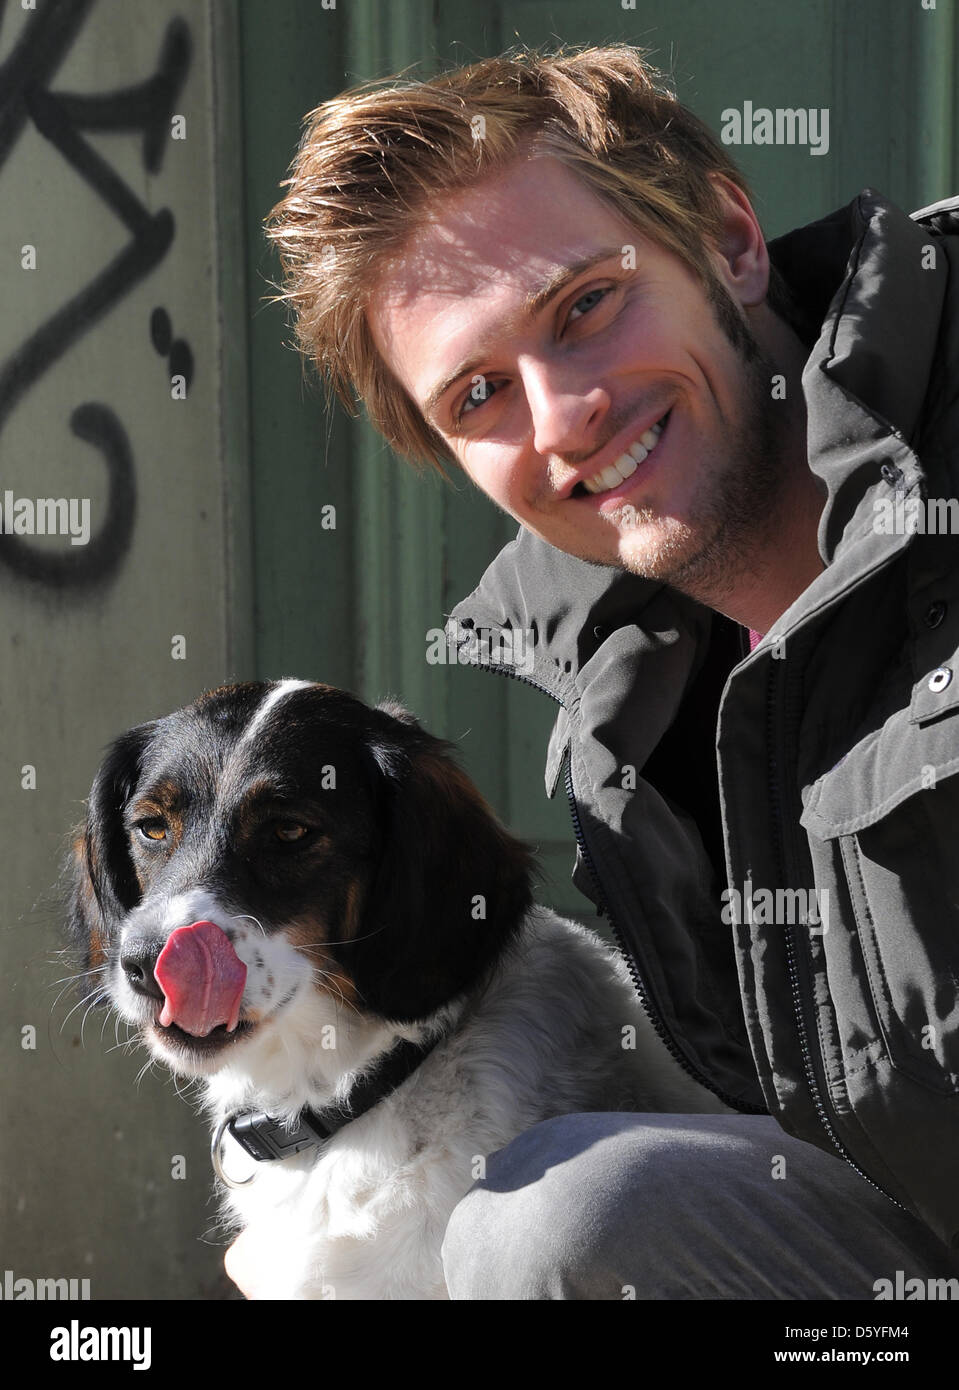 Actor Joern Schloenvoigt poses with new series dog Lisa at the exterior setting of the RTL television series 'Gute Zeiten Schlechte Zeiten' ('Good Times, Bad Times') in Potsdam, Germany, 18 October 2012. Lisa will replace former dog Lisa. Photo: BERND SETTNIK Stock Photo